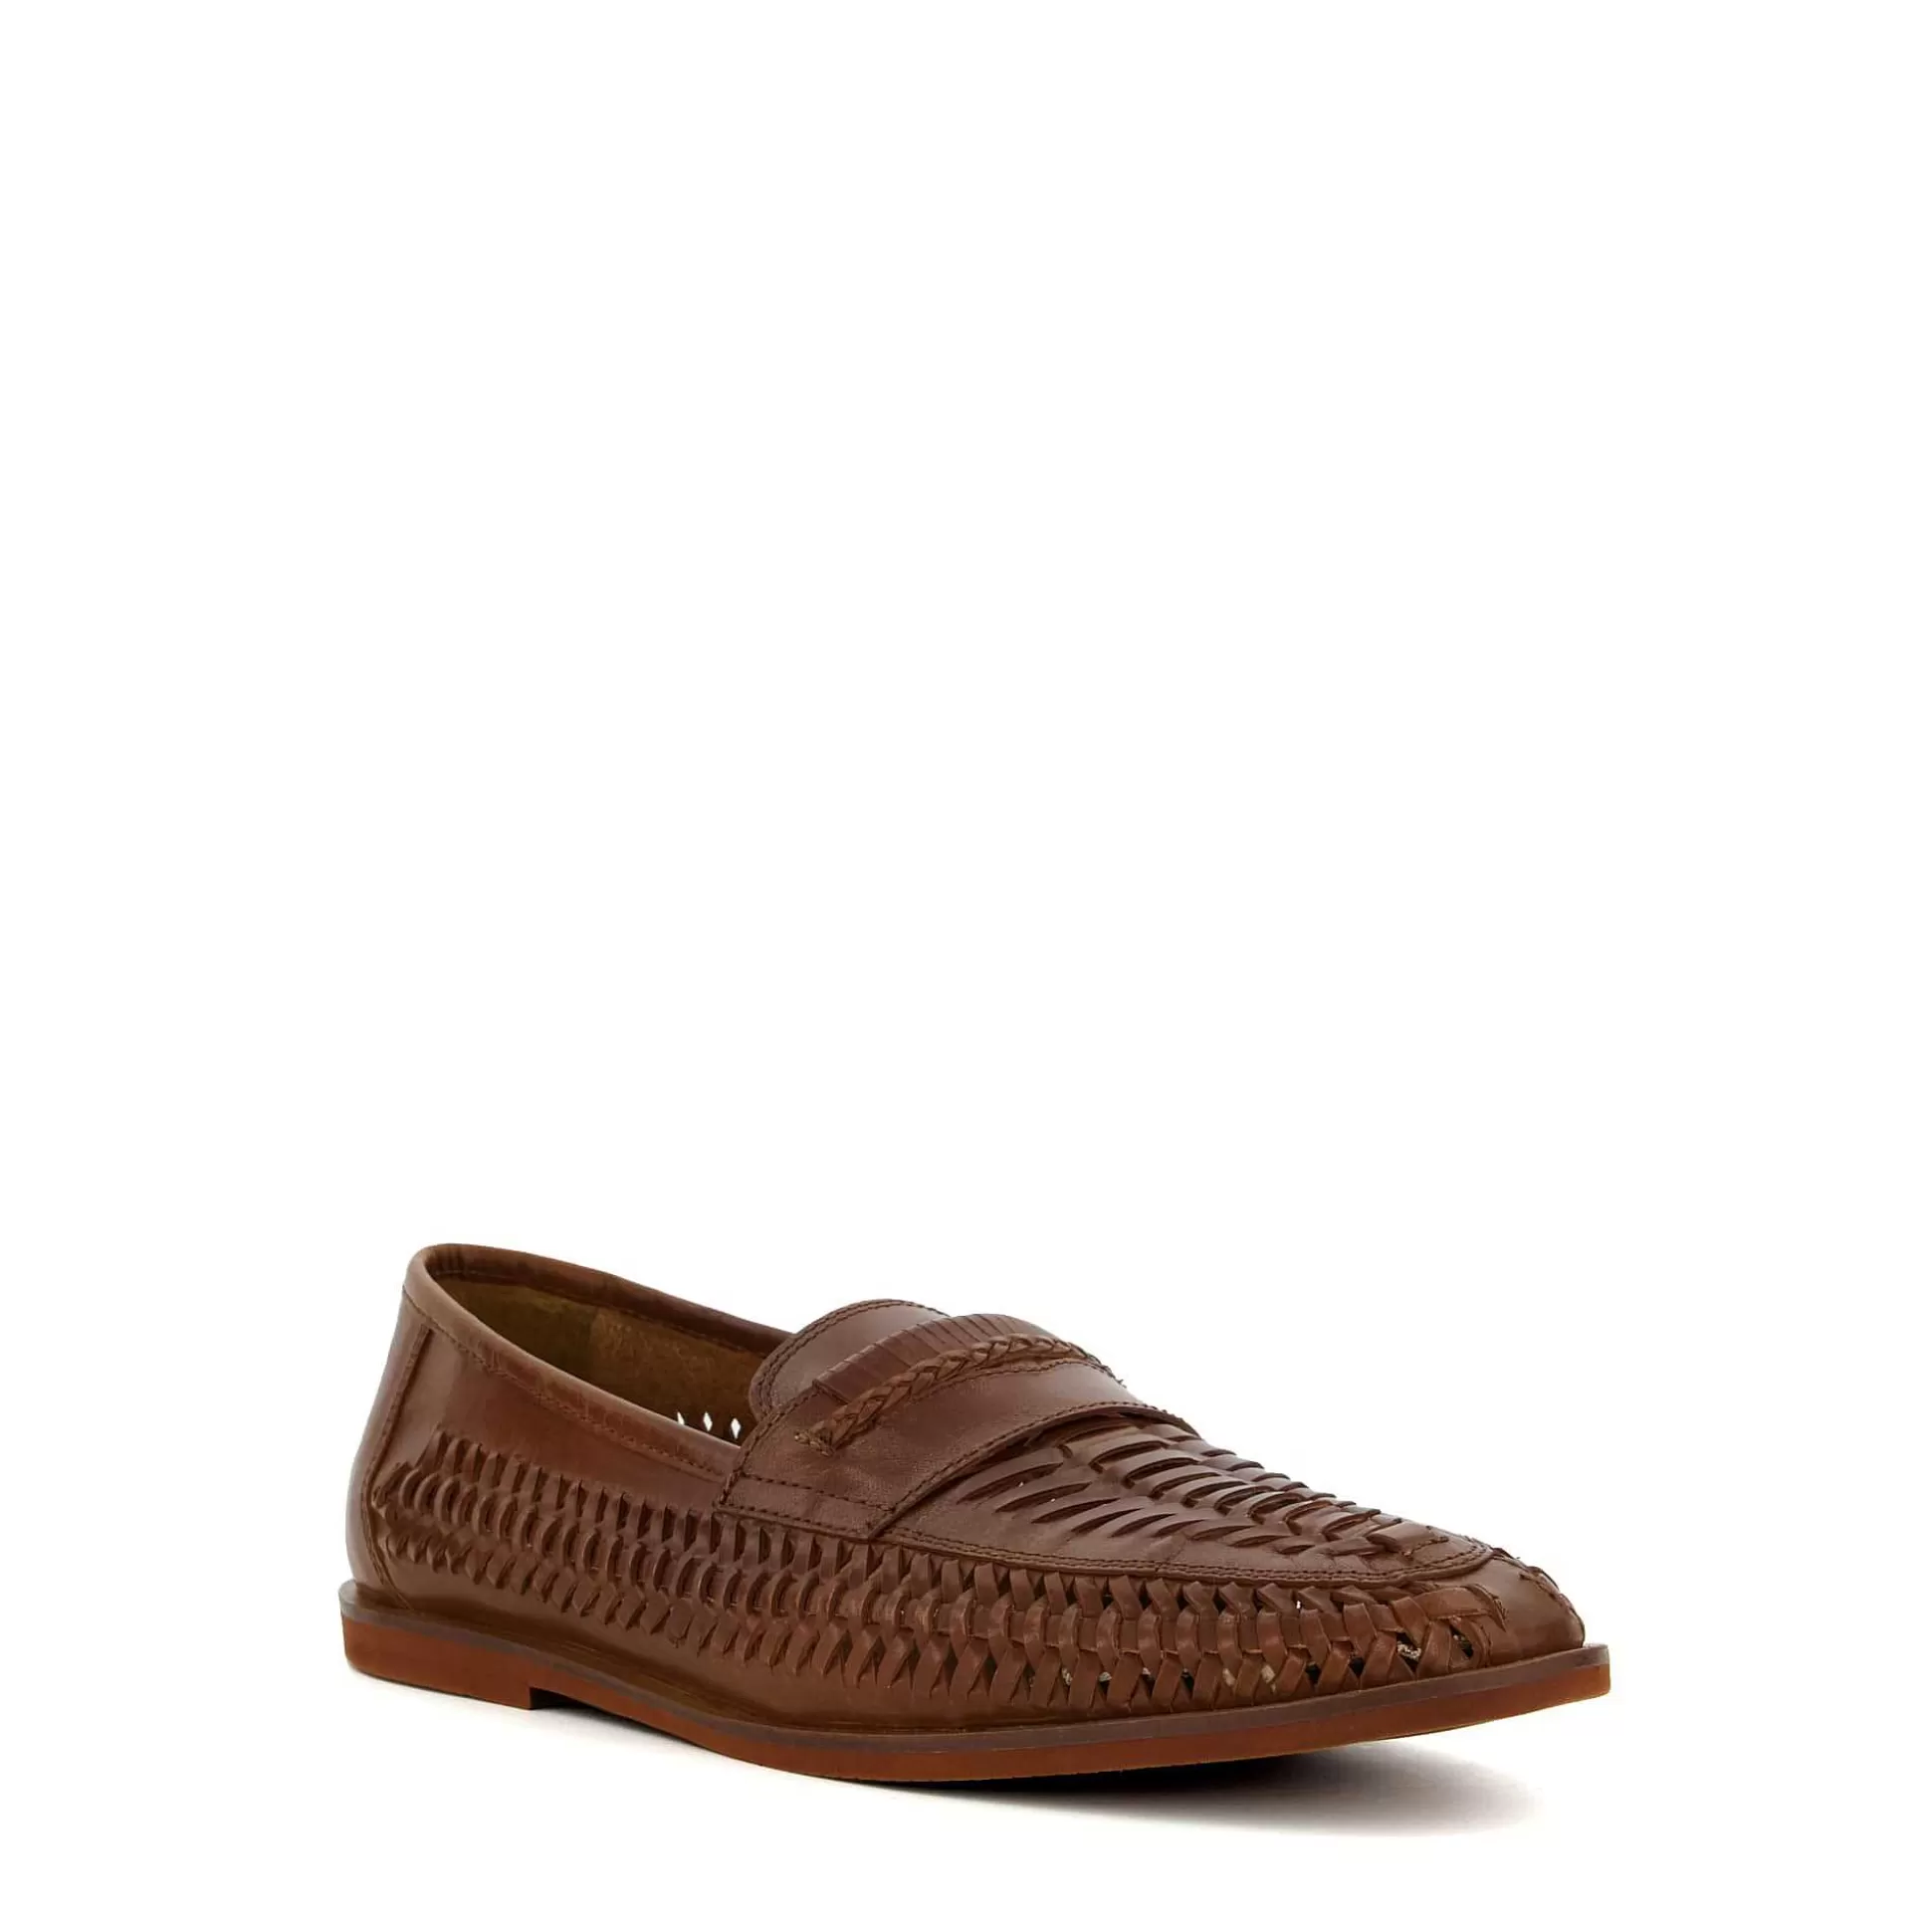 Dune London BRICKLES - TAN-Men Casual Shoes | Loafers